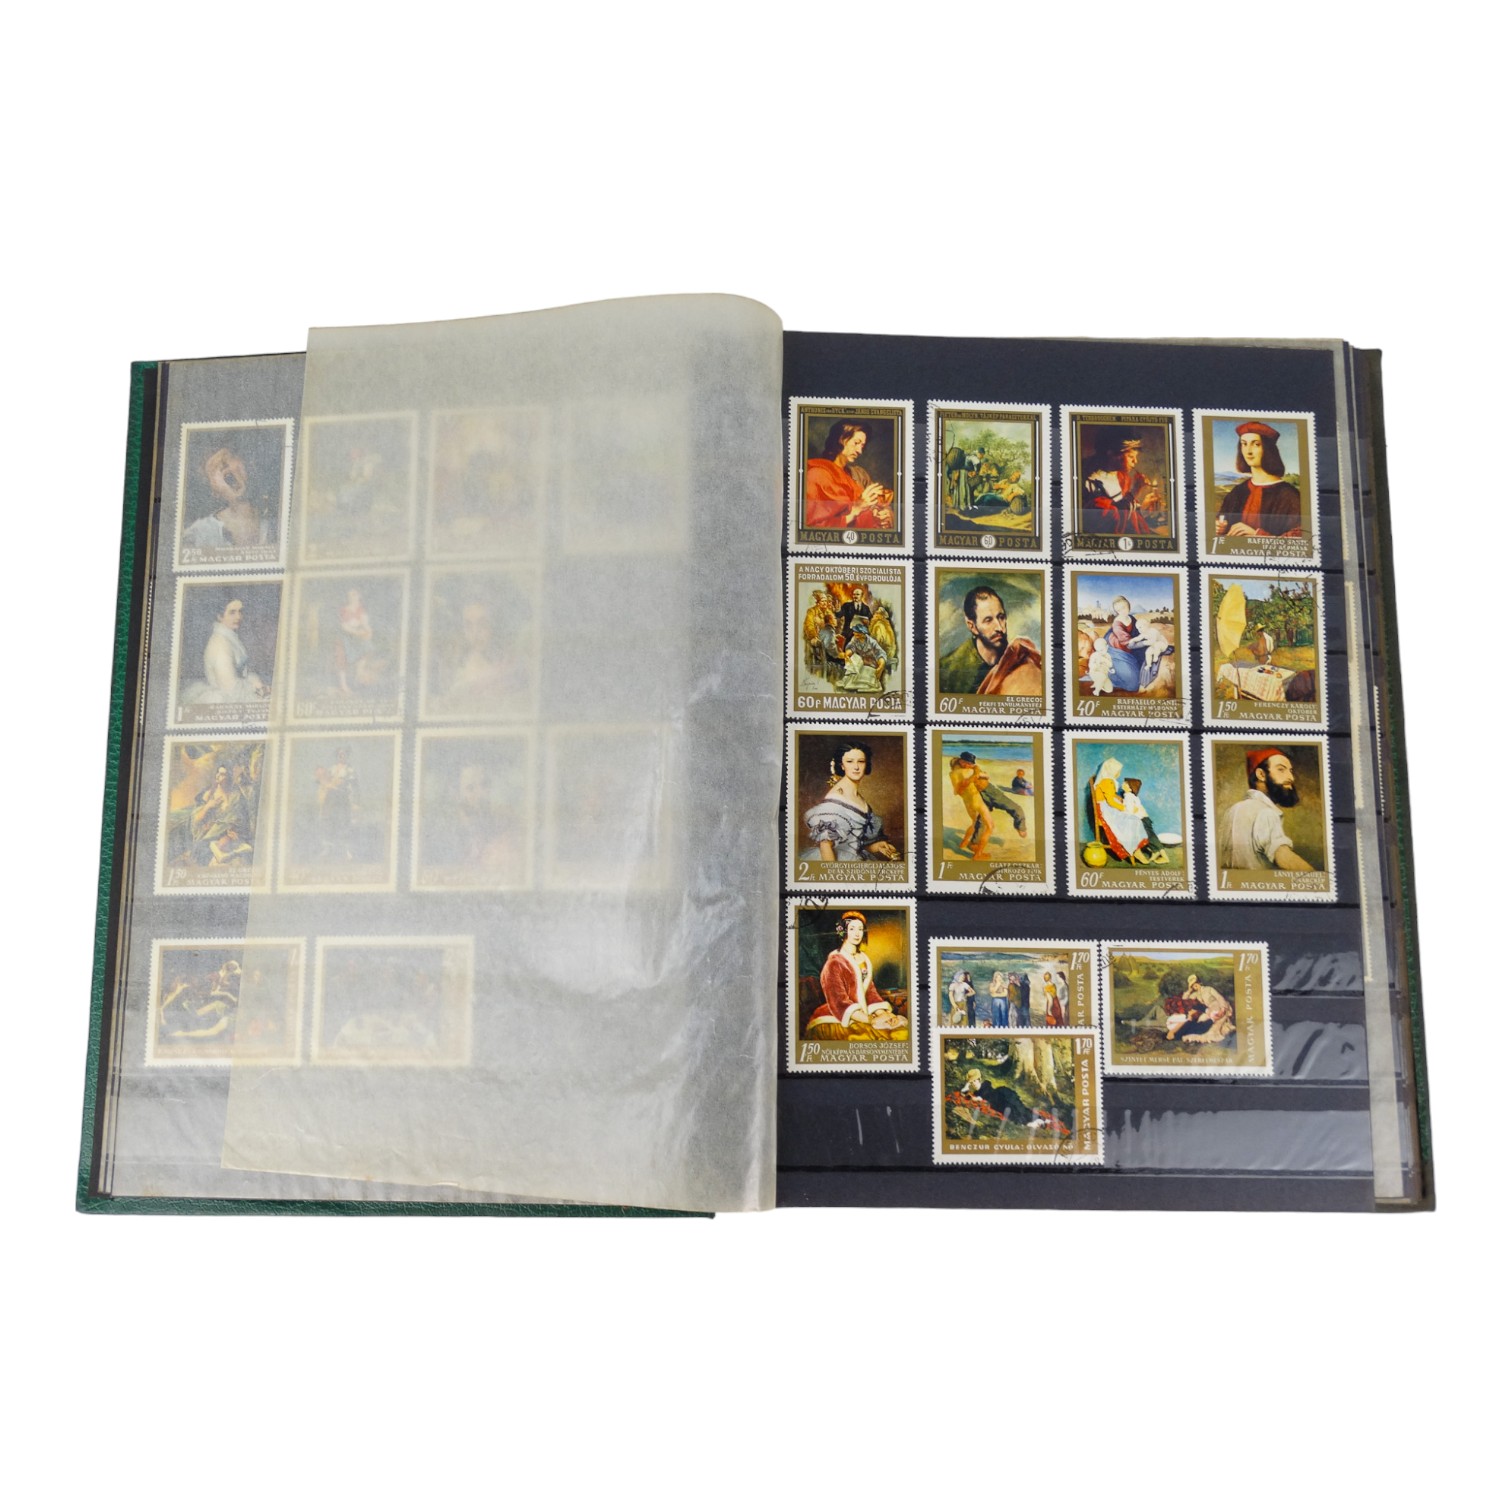 ART STAMPS OF FRANCE, ISREAL, JAPAN - INCLUDES MANY MINT - A green stock book full of art stamps - Image 2 of 4